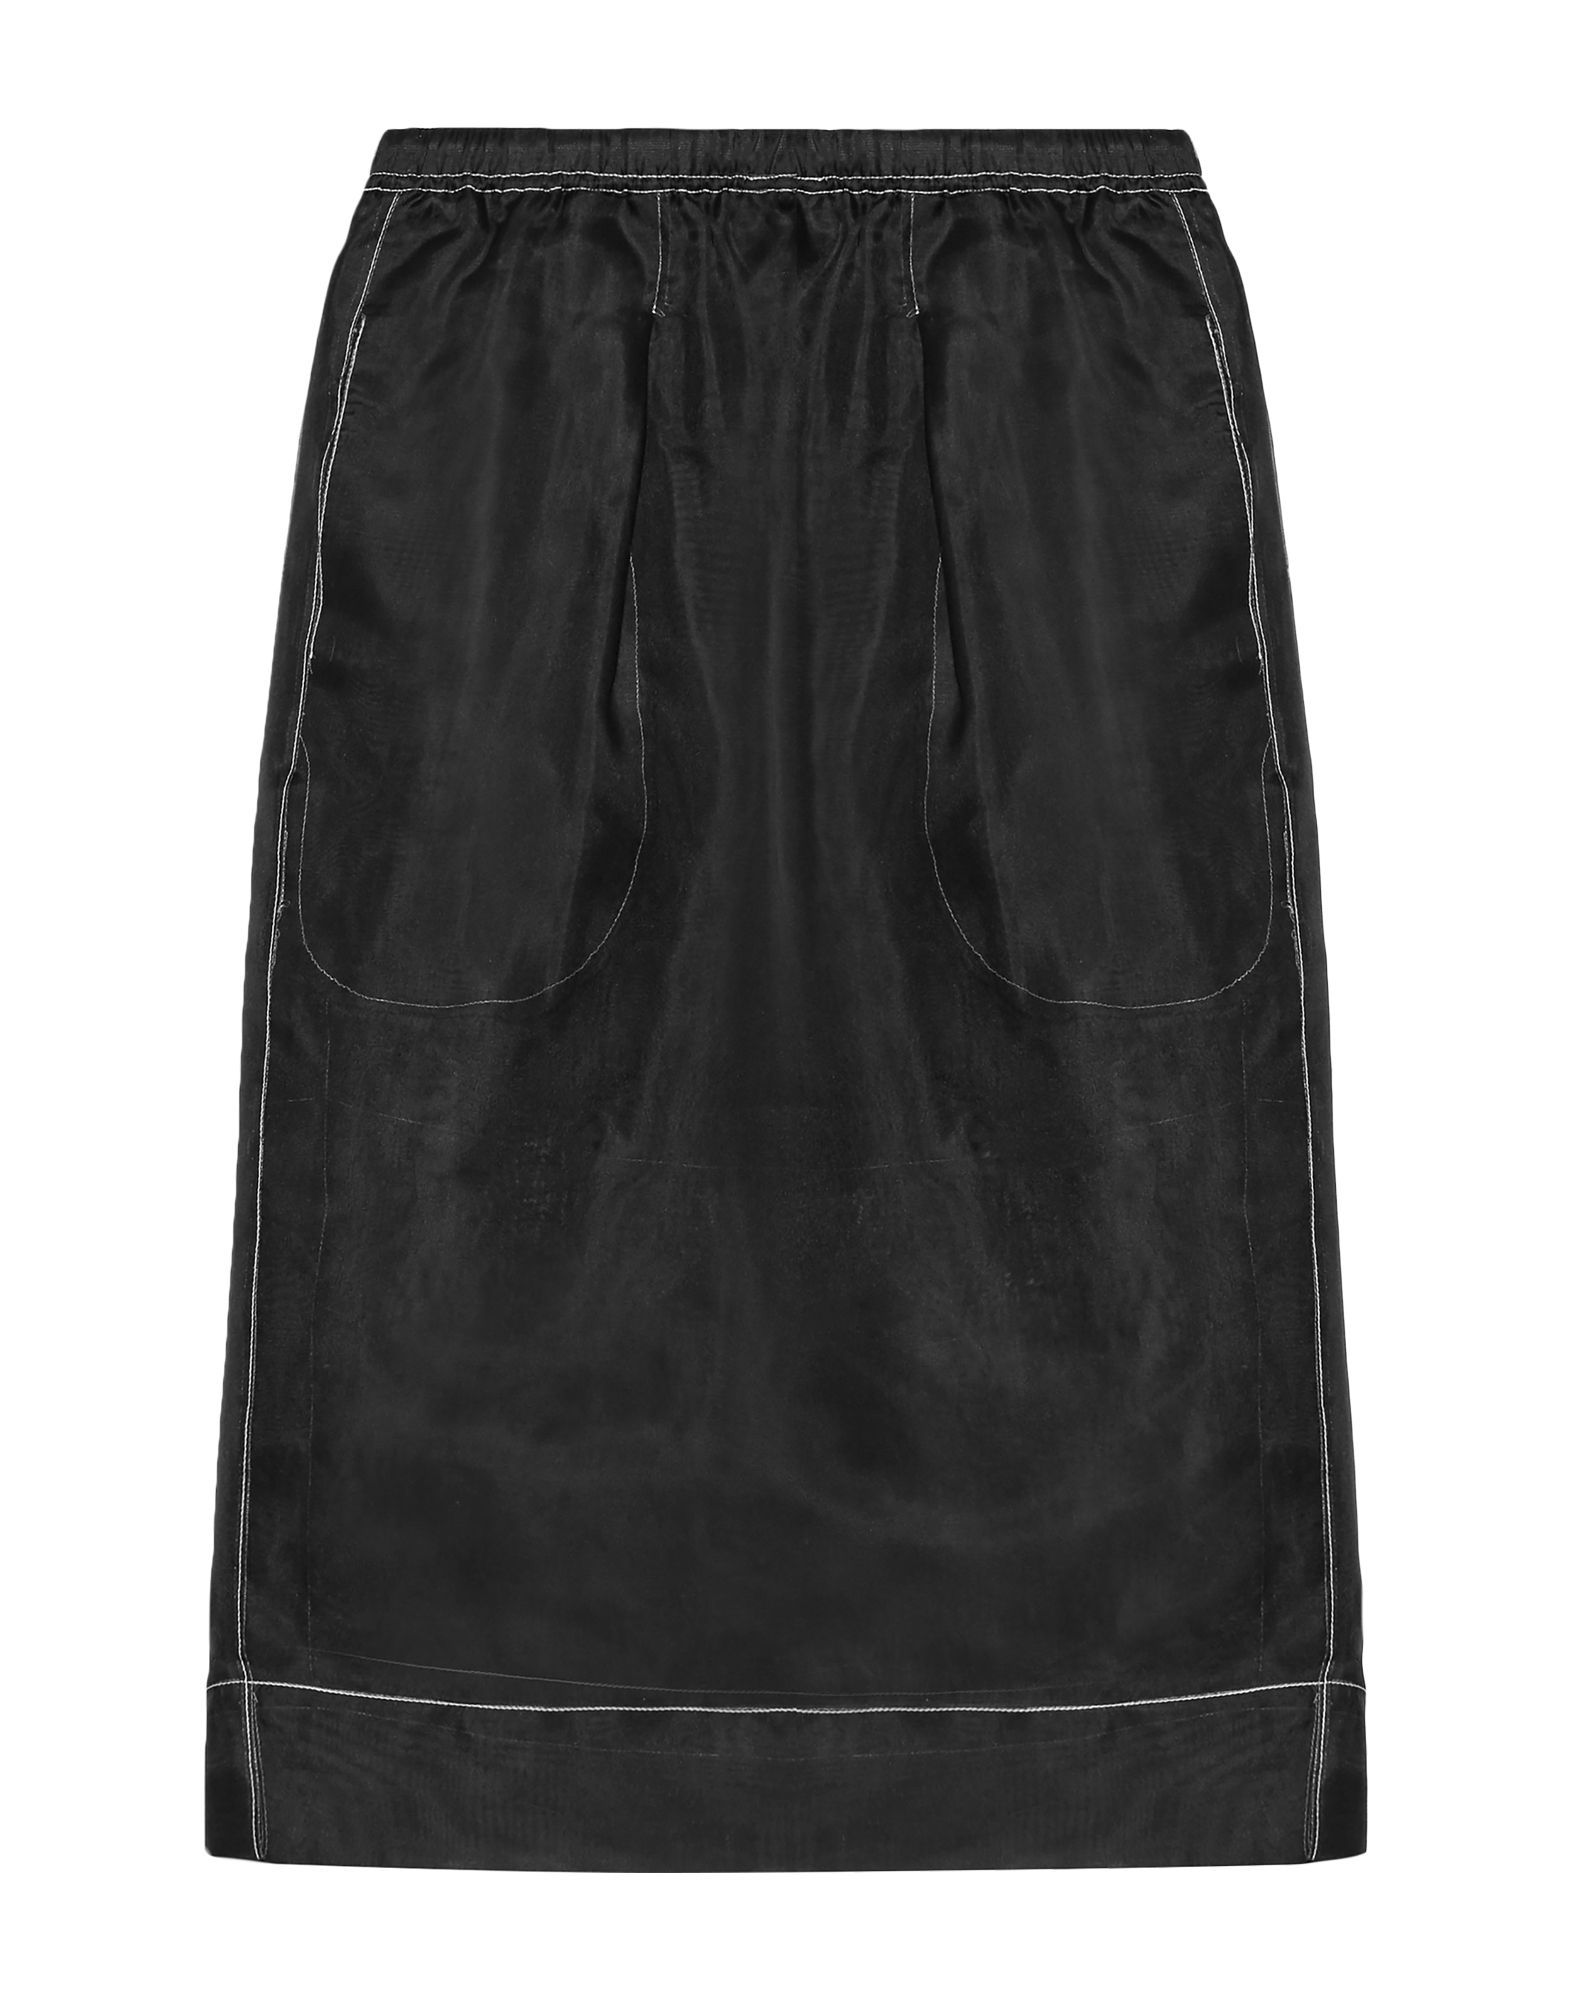 organza, stitching , solid colour, drawstring waist, multipockets, fully lined, skirt